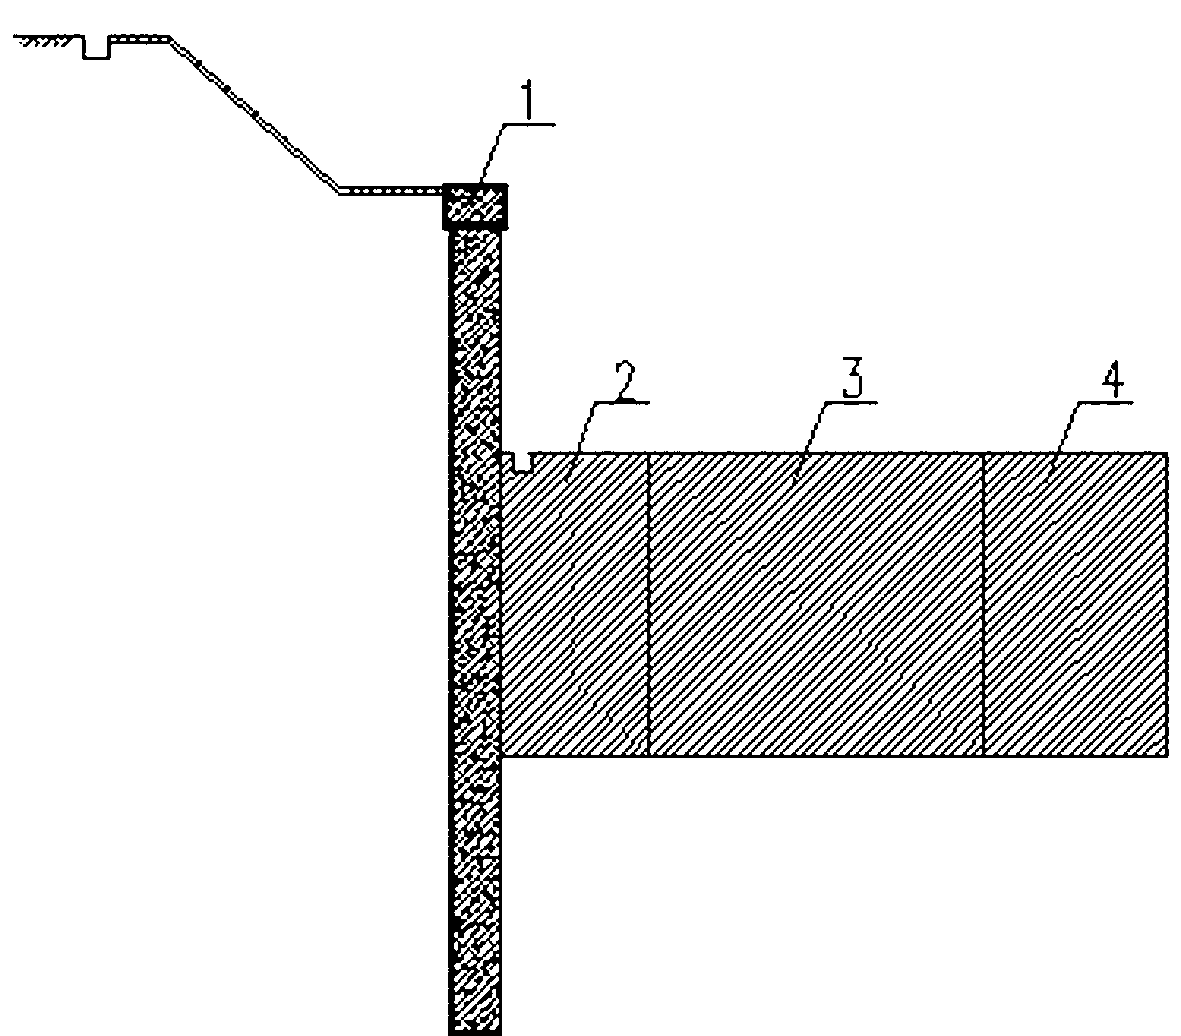 Cement-soil wall continuous arch structure used for strengthening weak soil in passive region of foundation pit and strengthening method